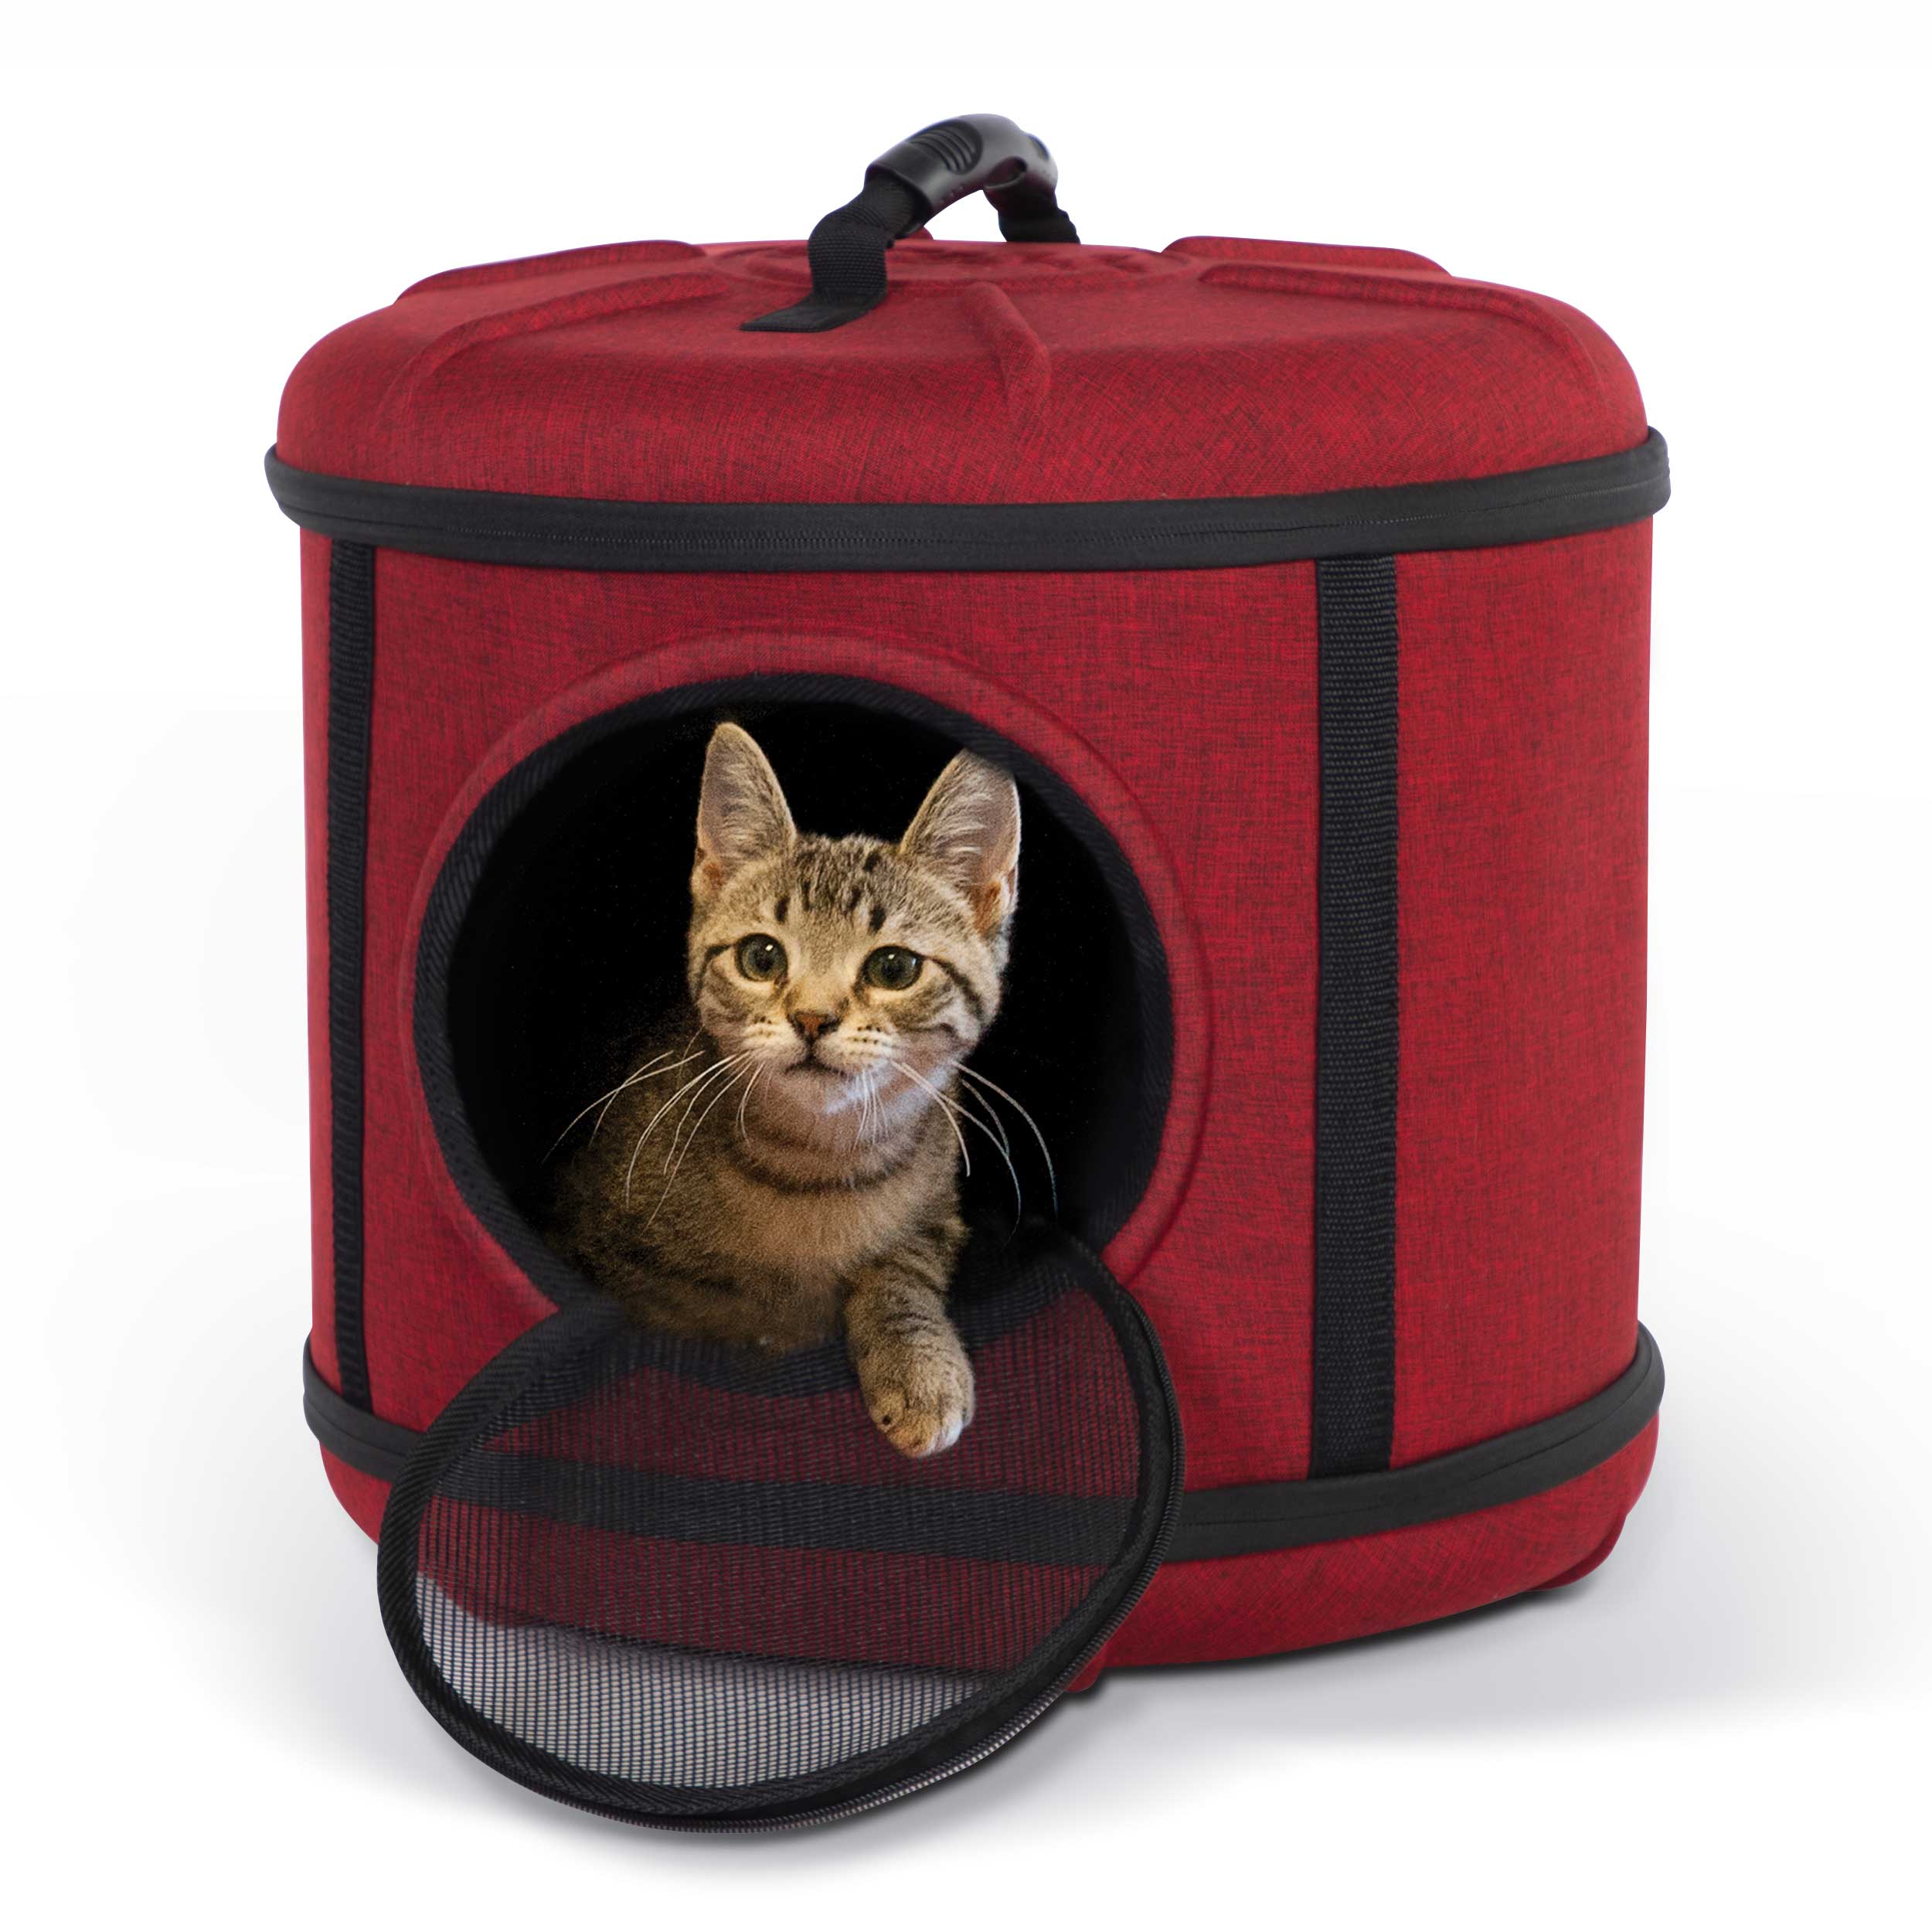 Mod Capsule Cat Bed amp Carrier CatsPlay Superstore